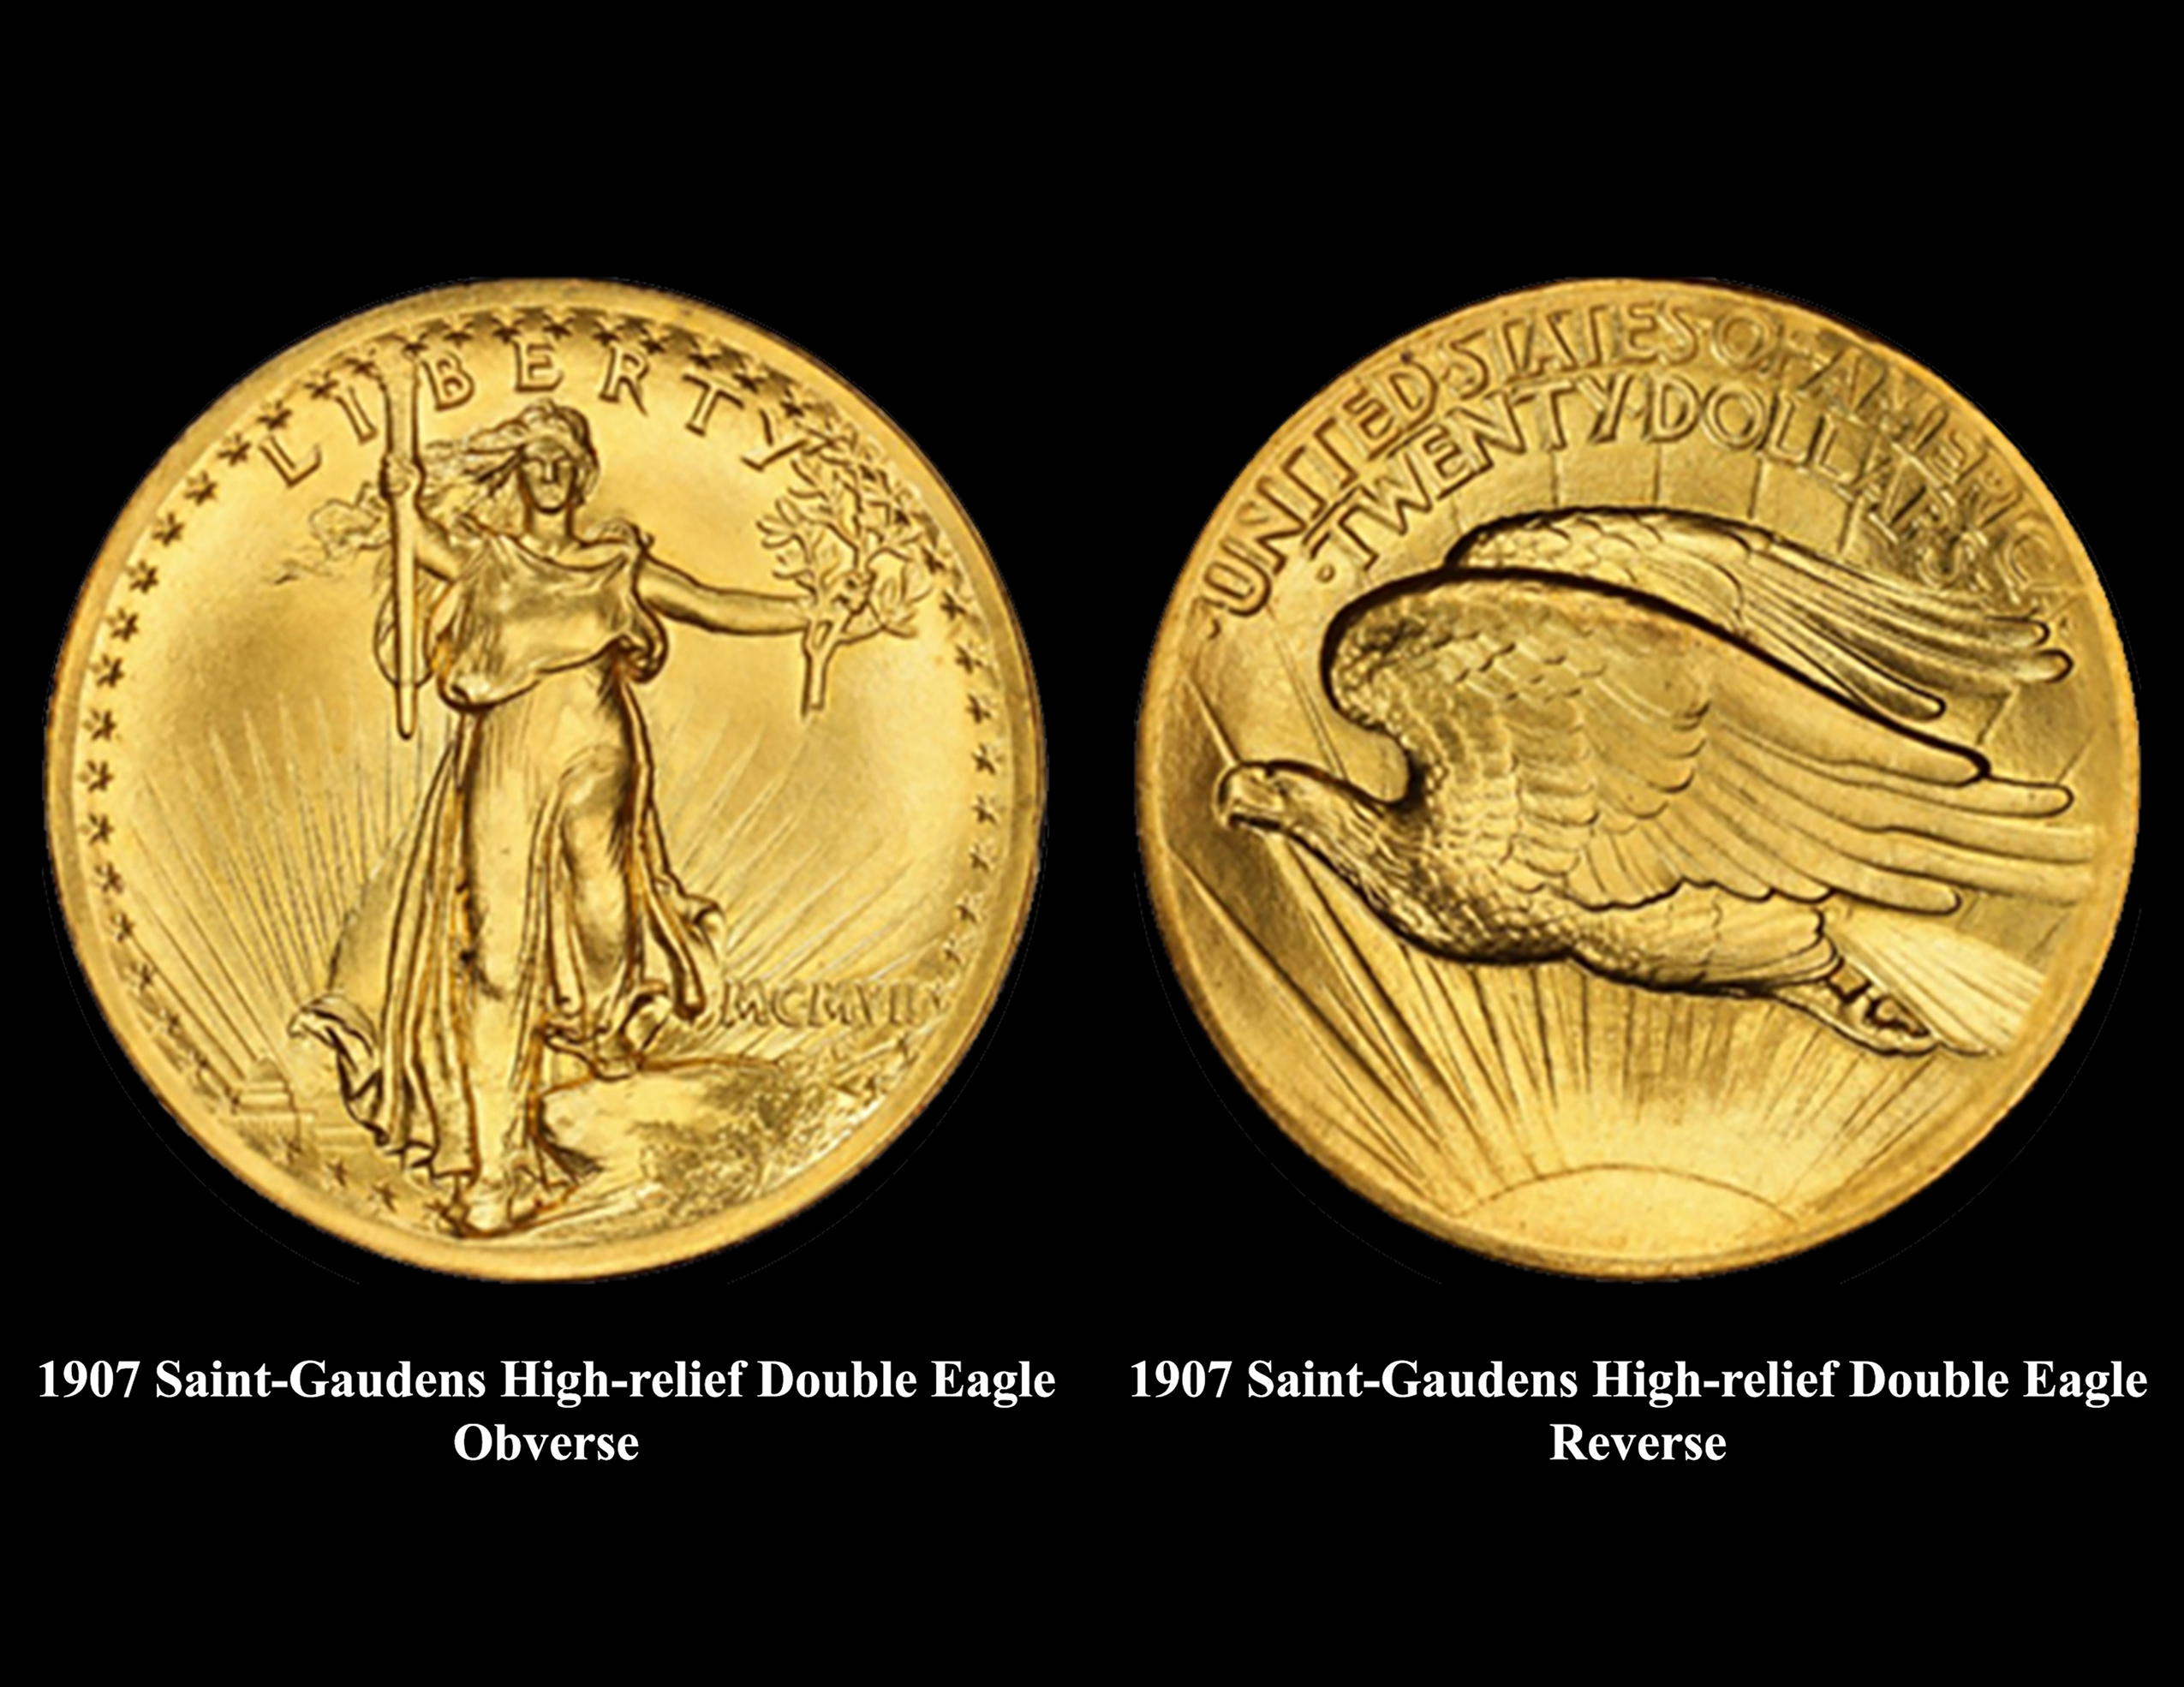 2026 Best of the Mint - 1907 Saint-Gaudens High-Relief Double Eagle